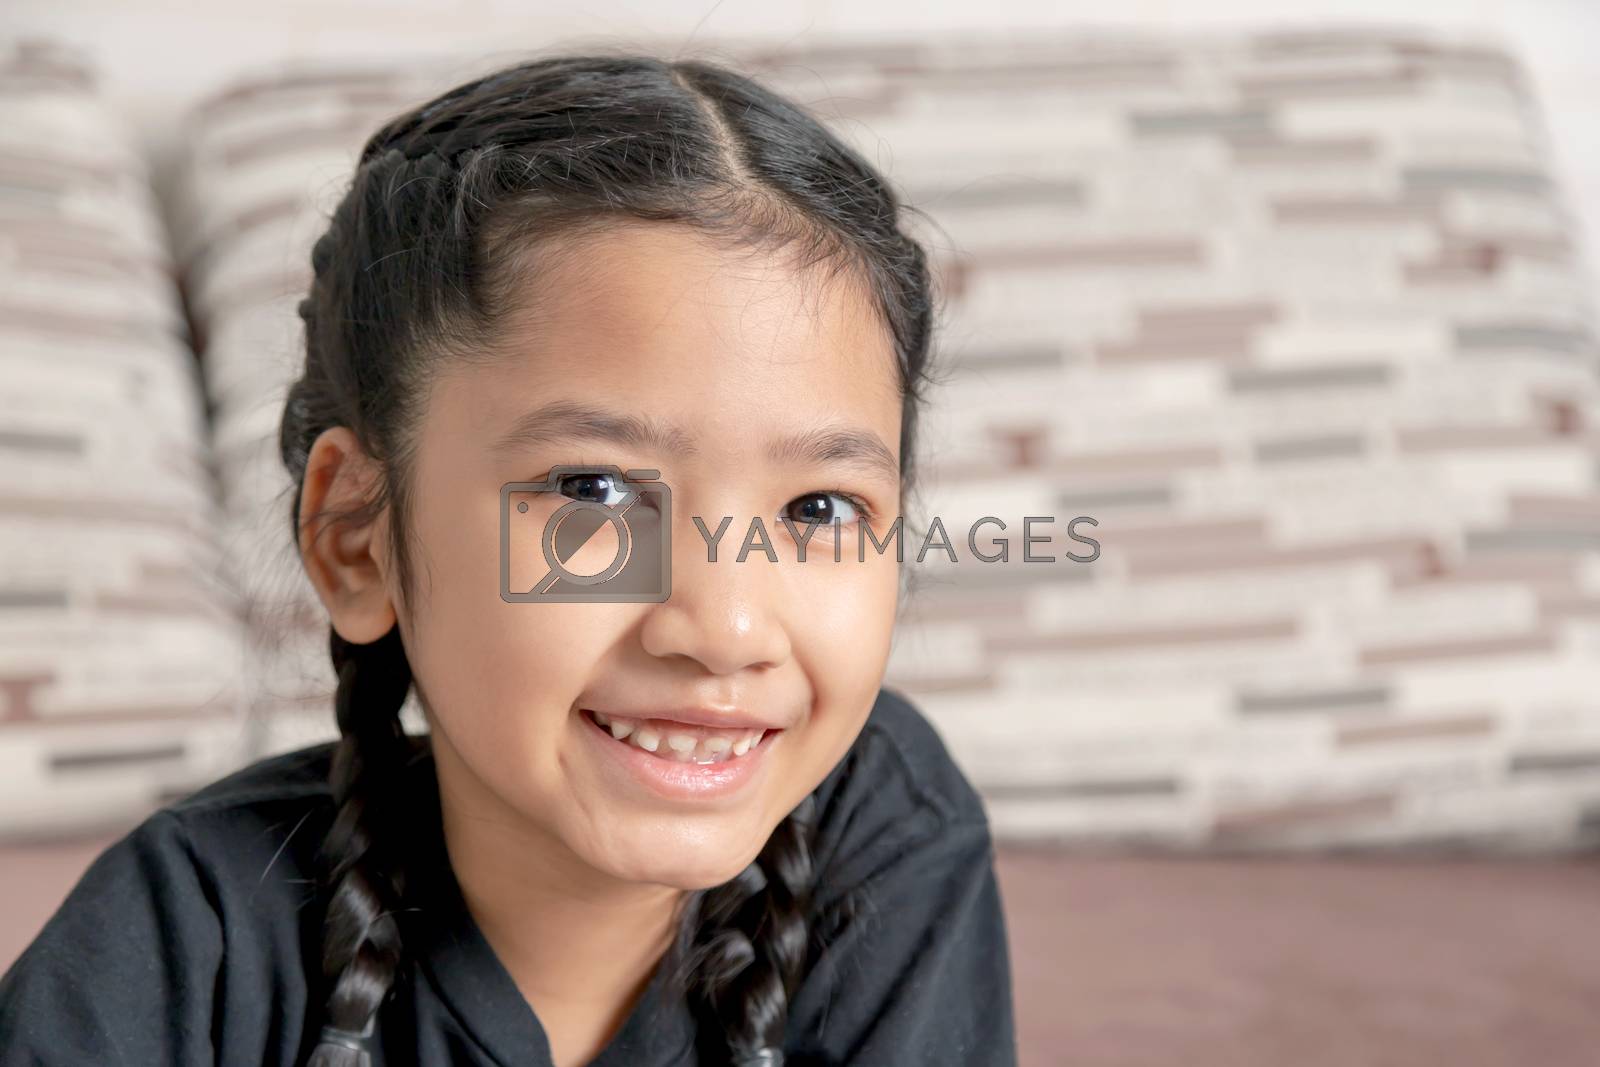 Royalty free image of Asian girl in a black braid is smiling by Nikkikii